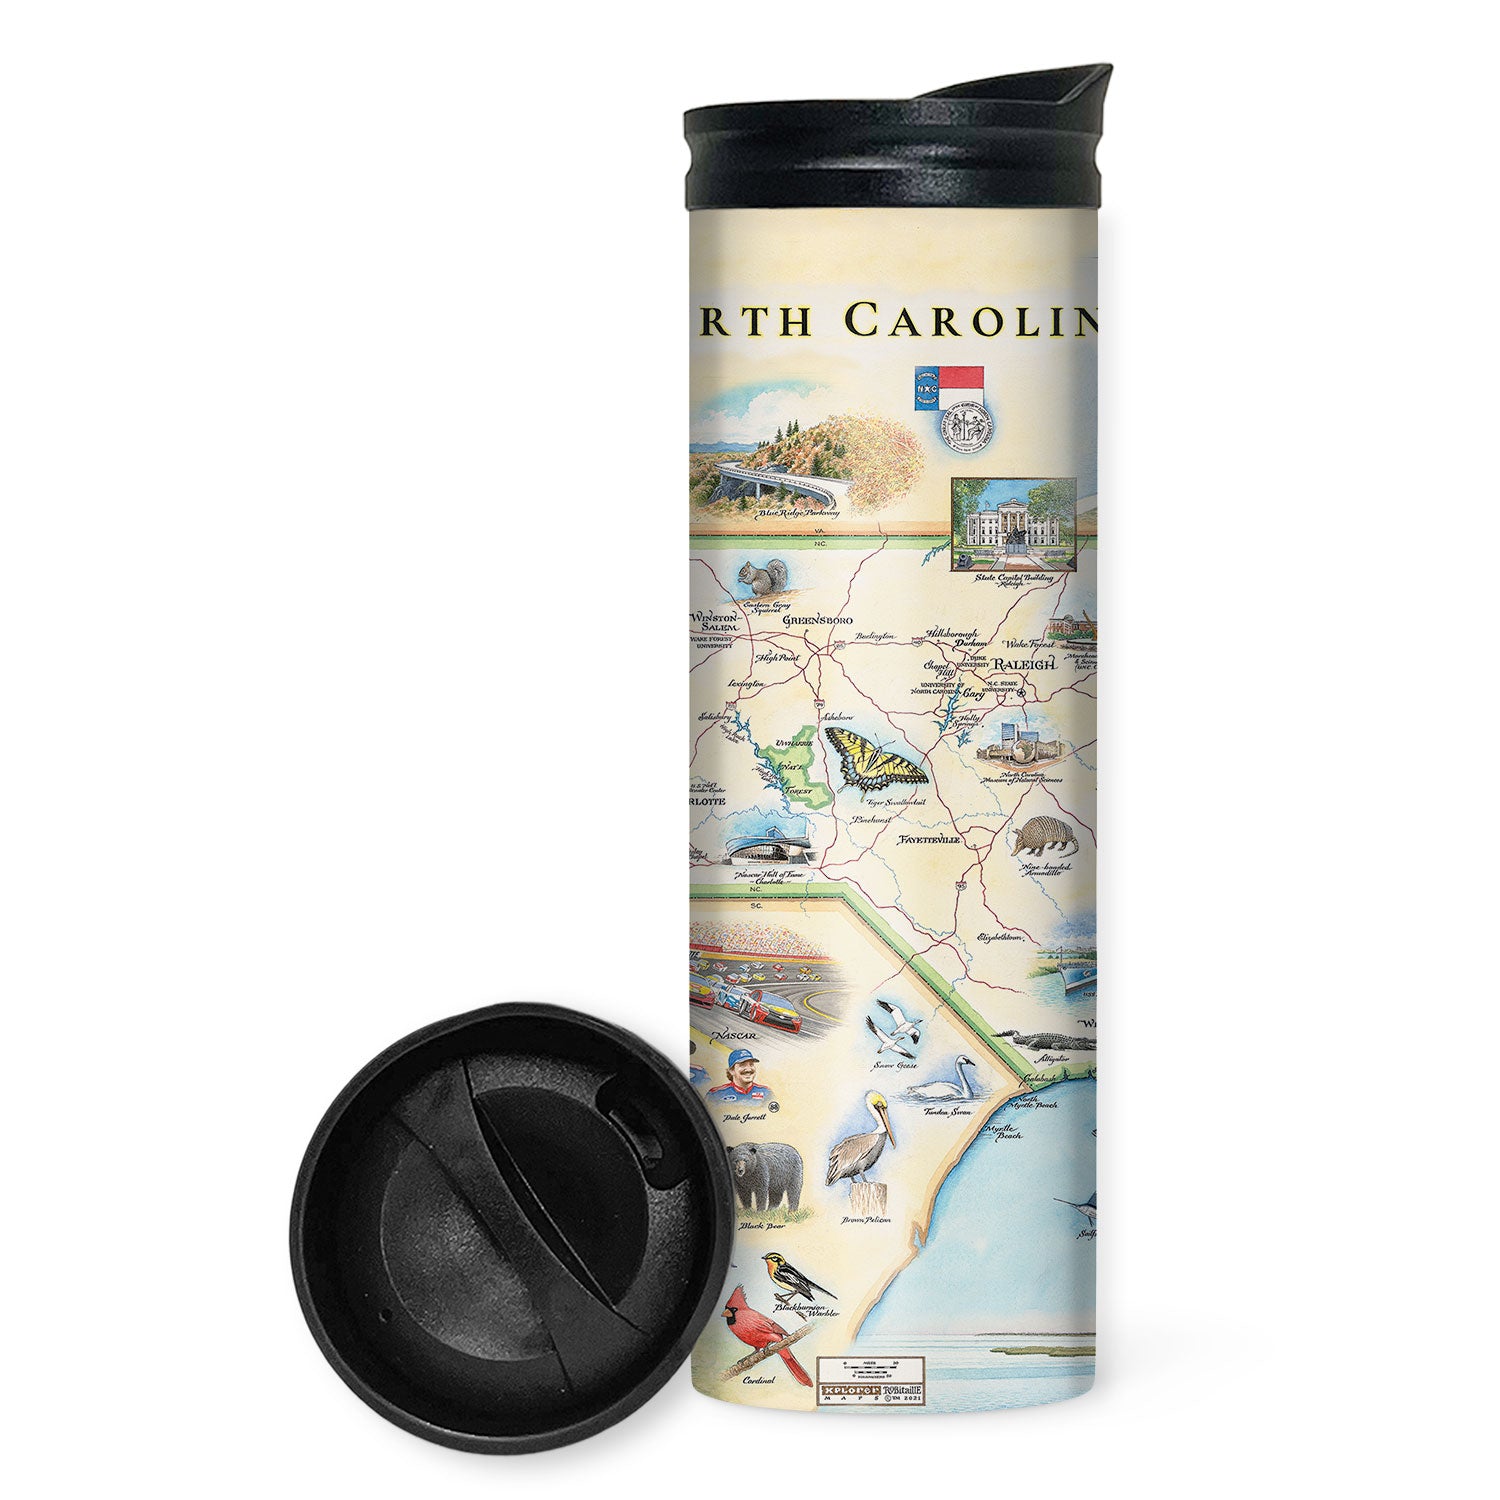 North Carolina State Map 16 oz Travel bottle in earth tone colors. Featuring Sea birds, butterfly, Blue Ridge Highway, Nascar, bear, and animals.  